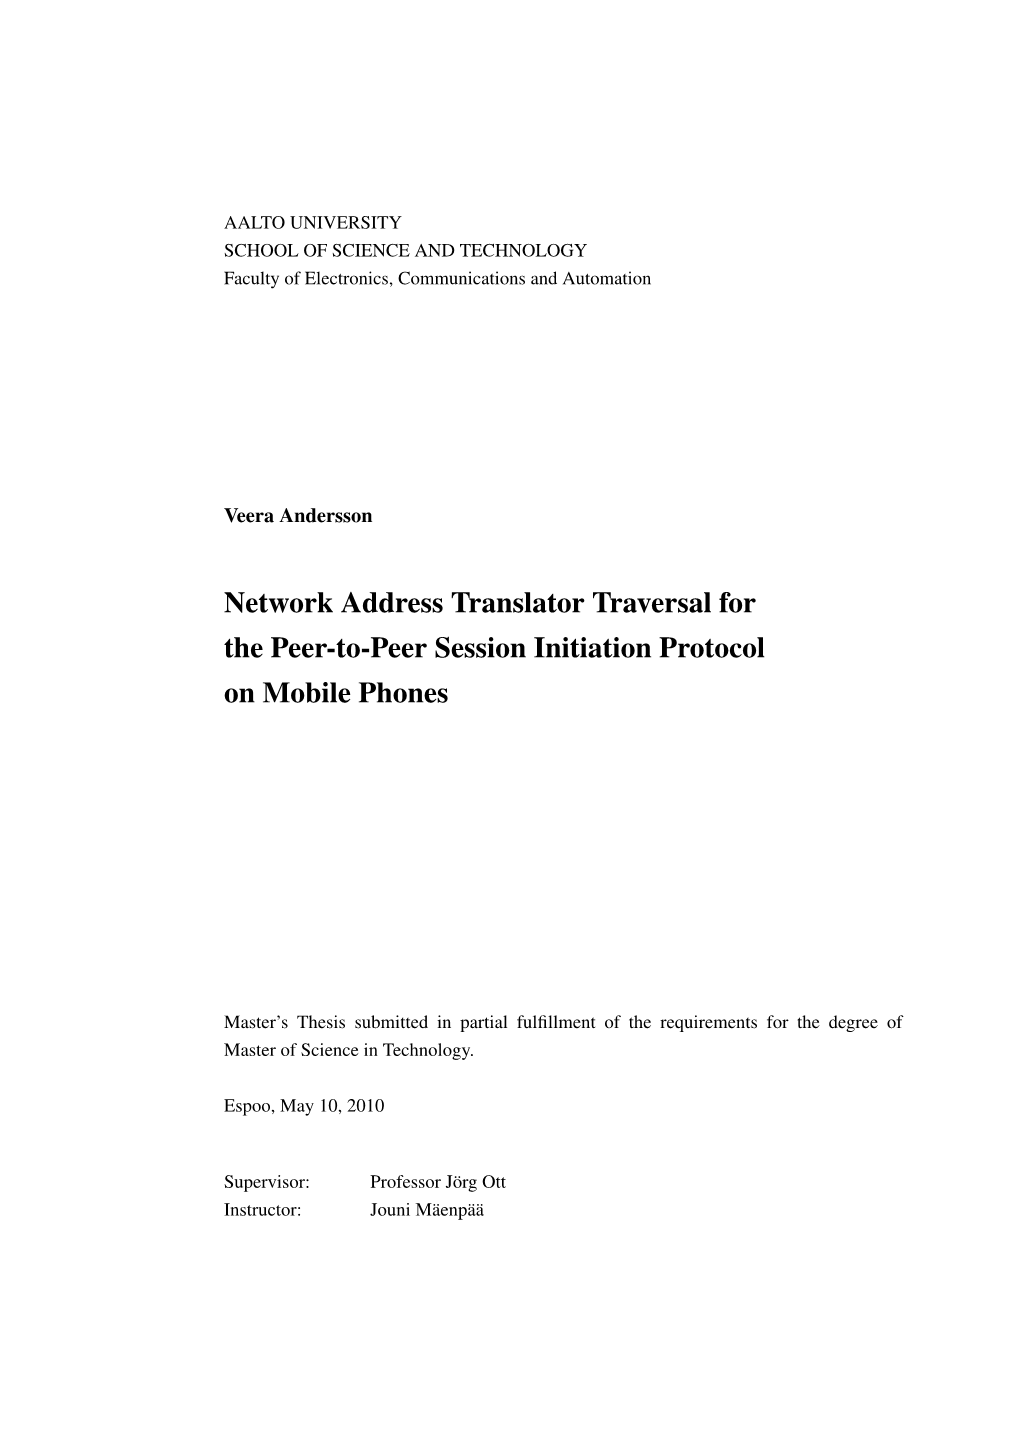 Network Address Translator Traversal for the Peer-To-Peer Session Initiation Protocol on Mobile Phones